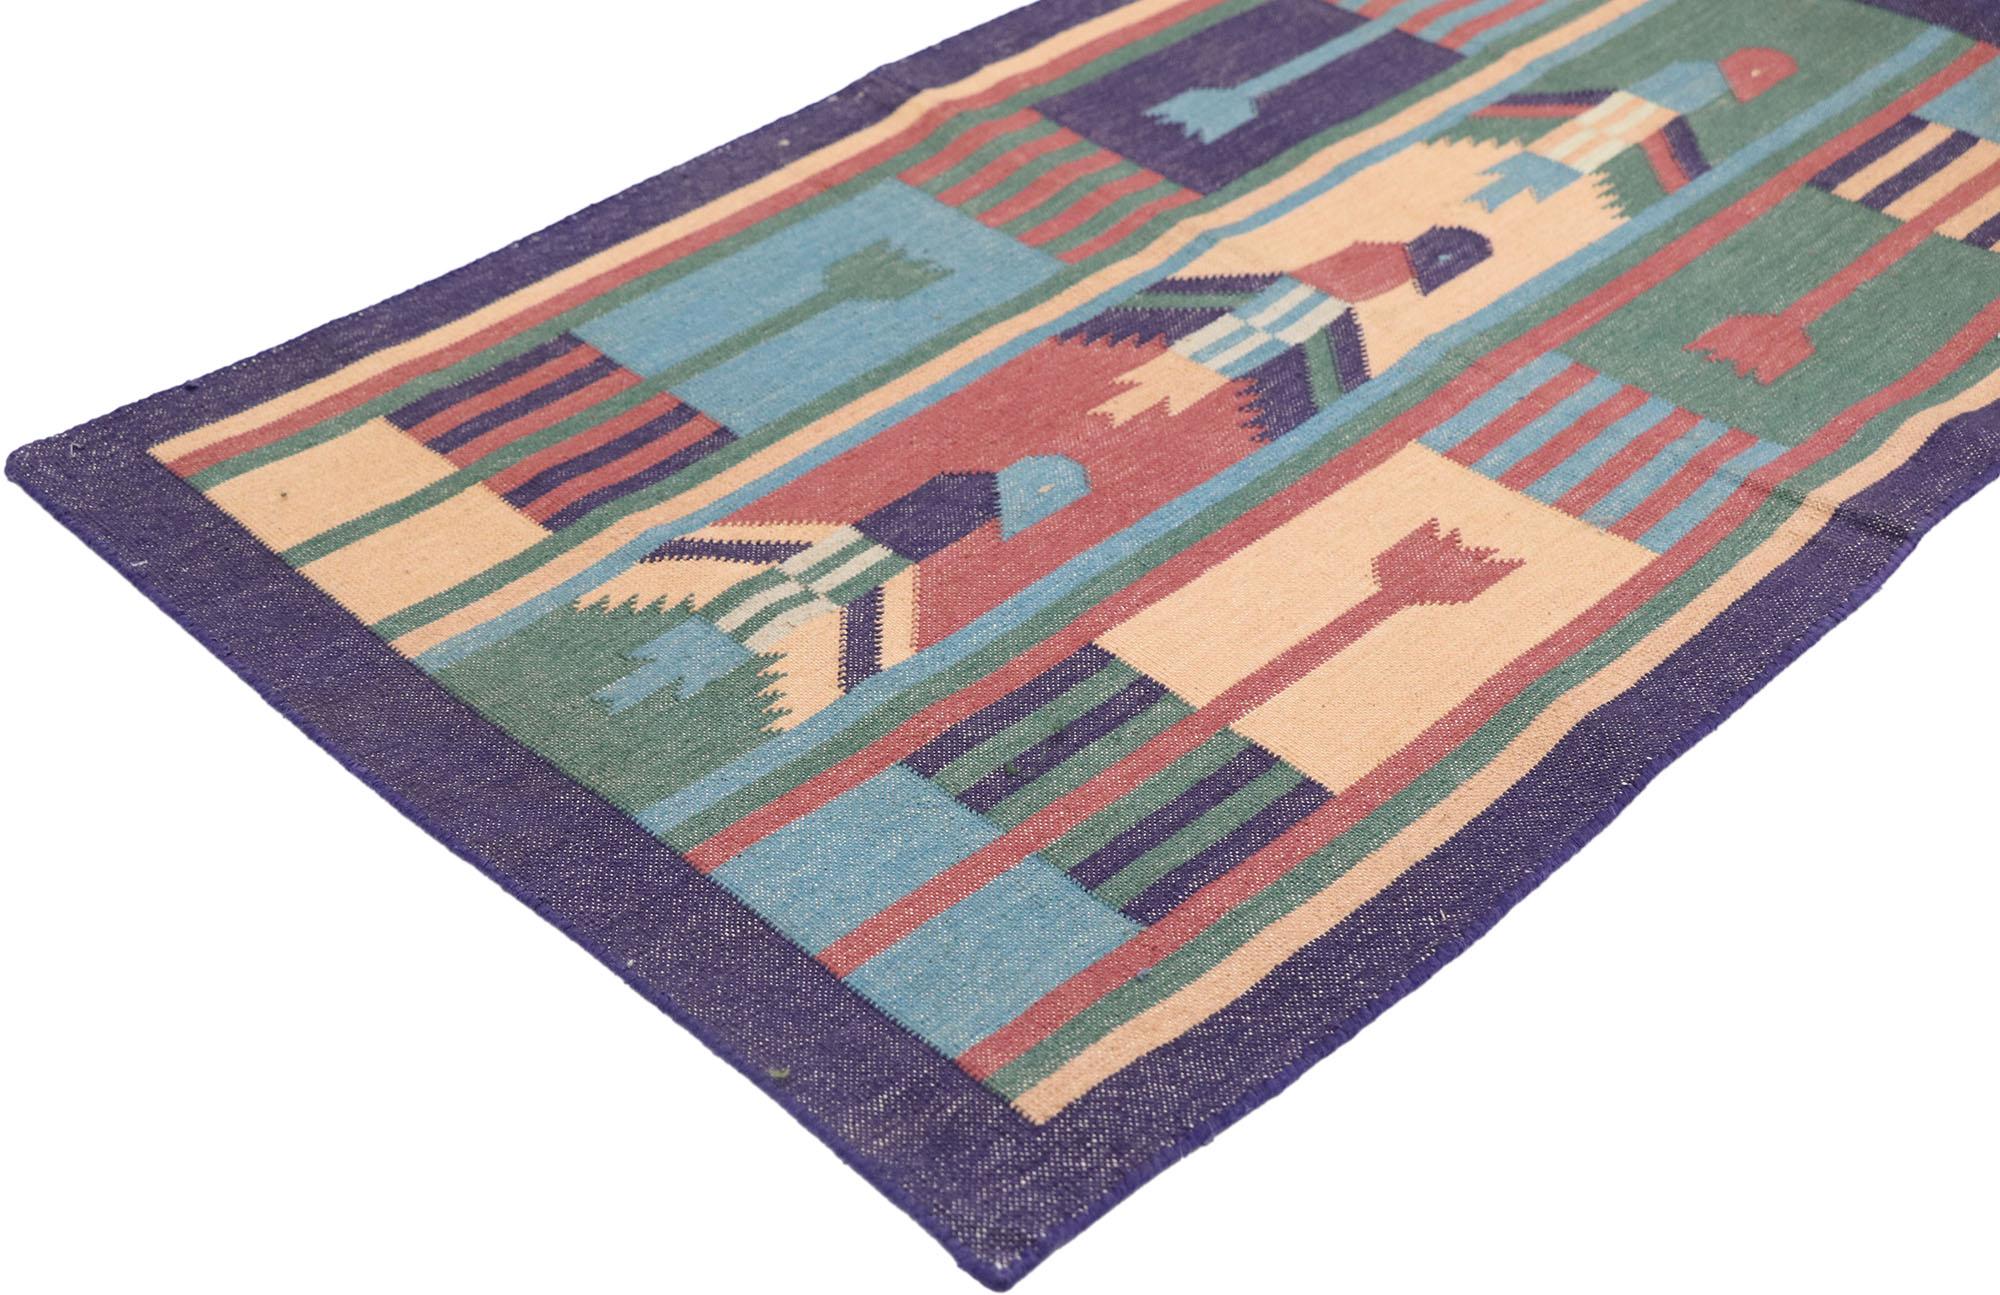 77913 Vintage Indian Dhurrie Rug with Postmodern Cubist Style 01'10 x 03'01. Full of tiny details and a bold expressive design combined with vibrant colors and tribal style, this hand-woven cotton vintage Indian Dhurrie rug is a captivating vision